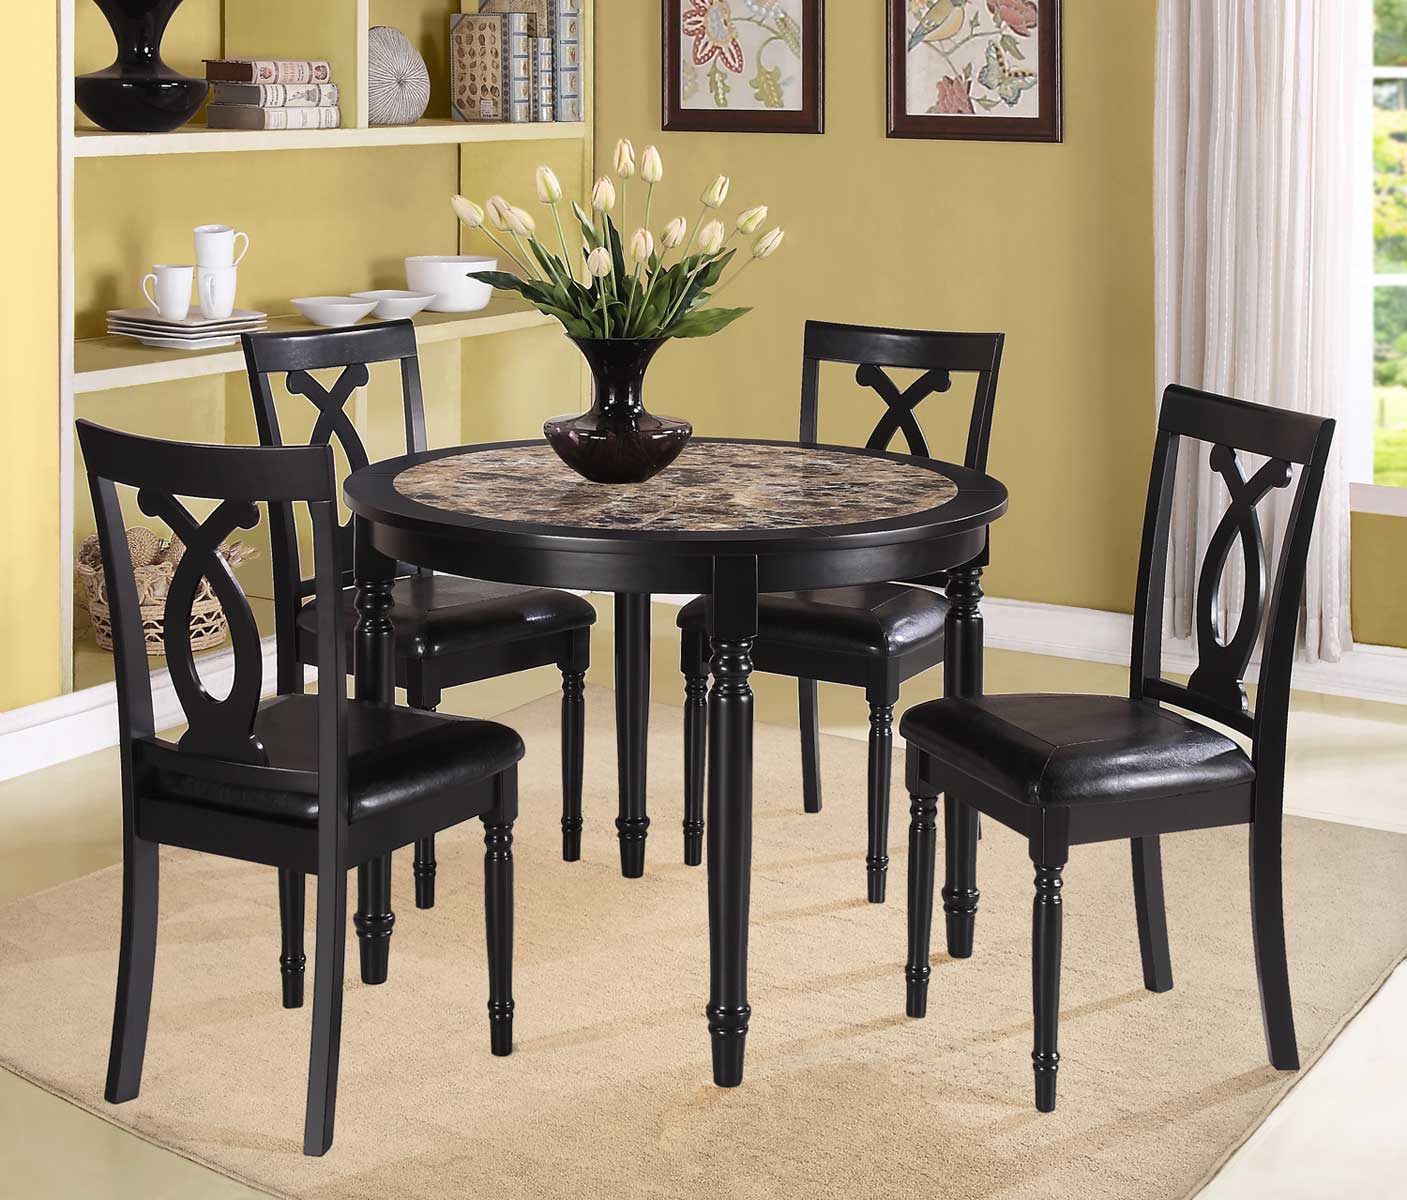 Homelegance Piper 5PC Round Dinette Set - Faux Marble 2566 |  Traveller Location